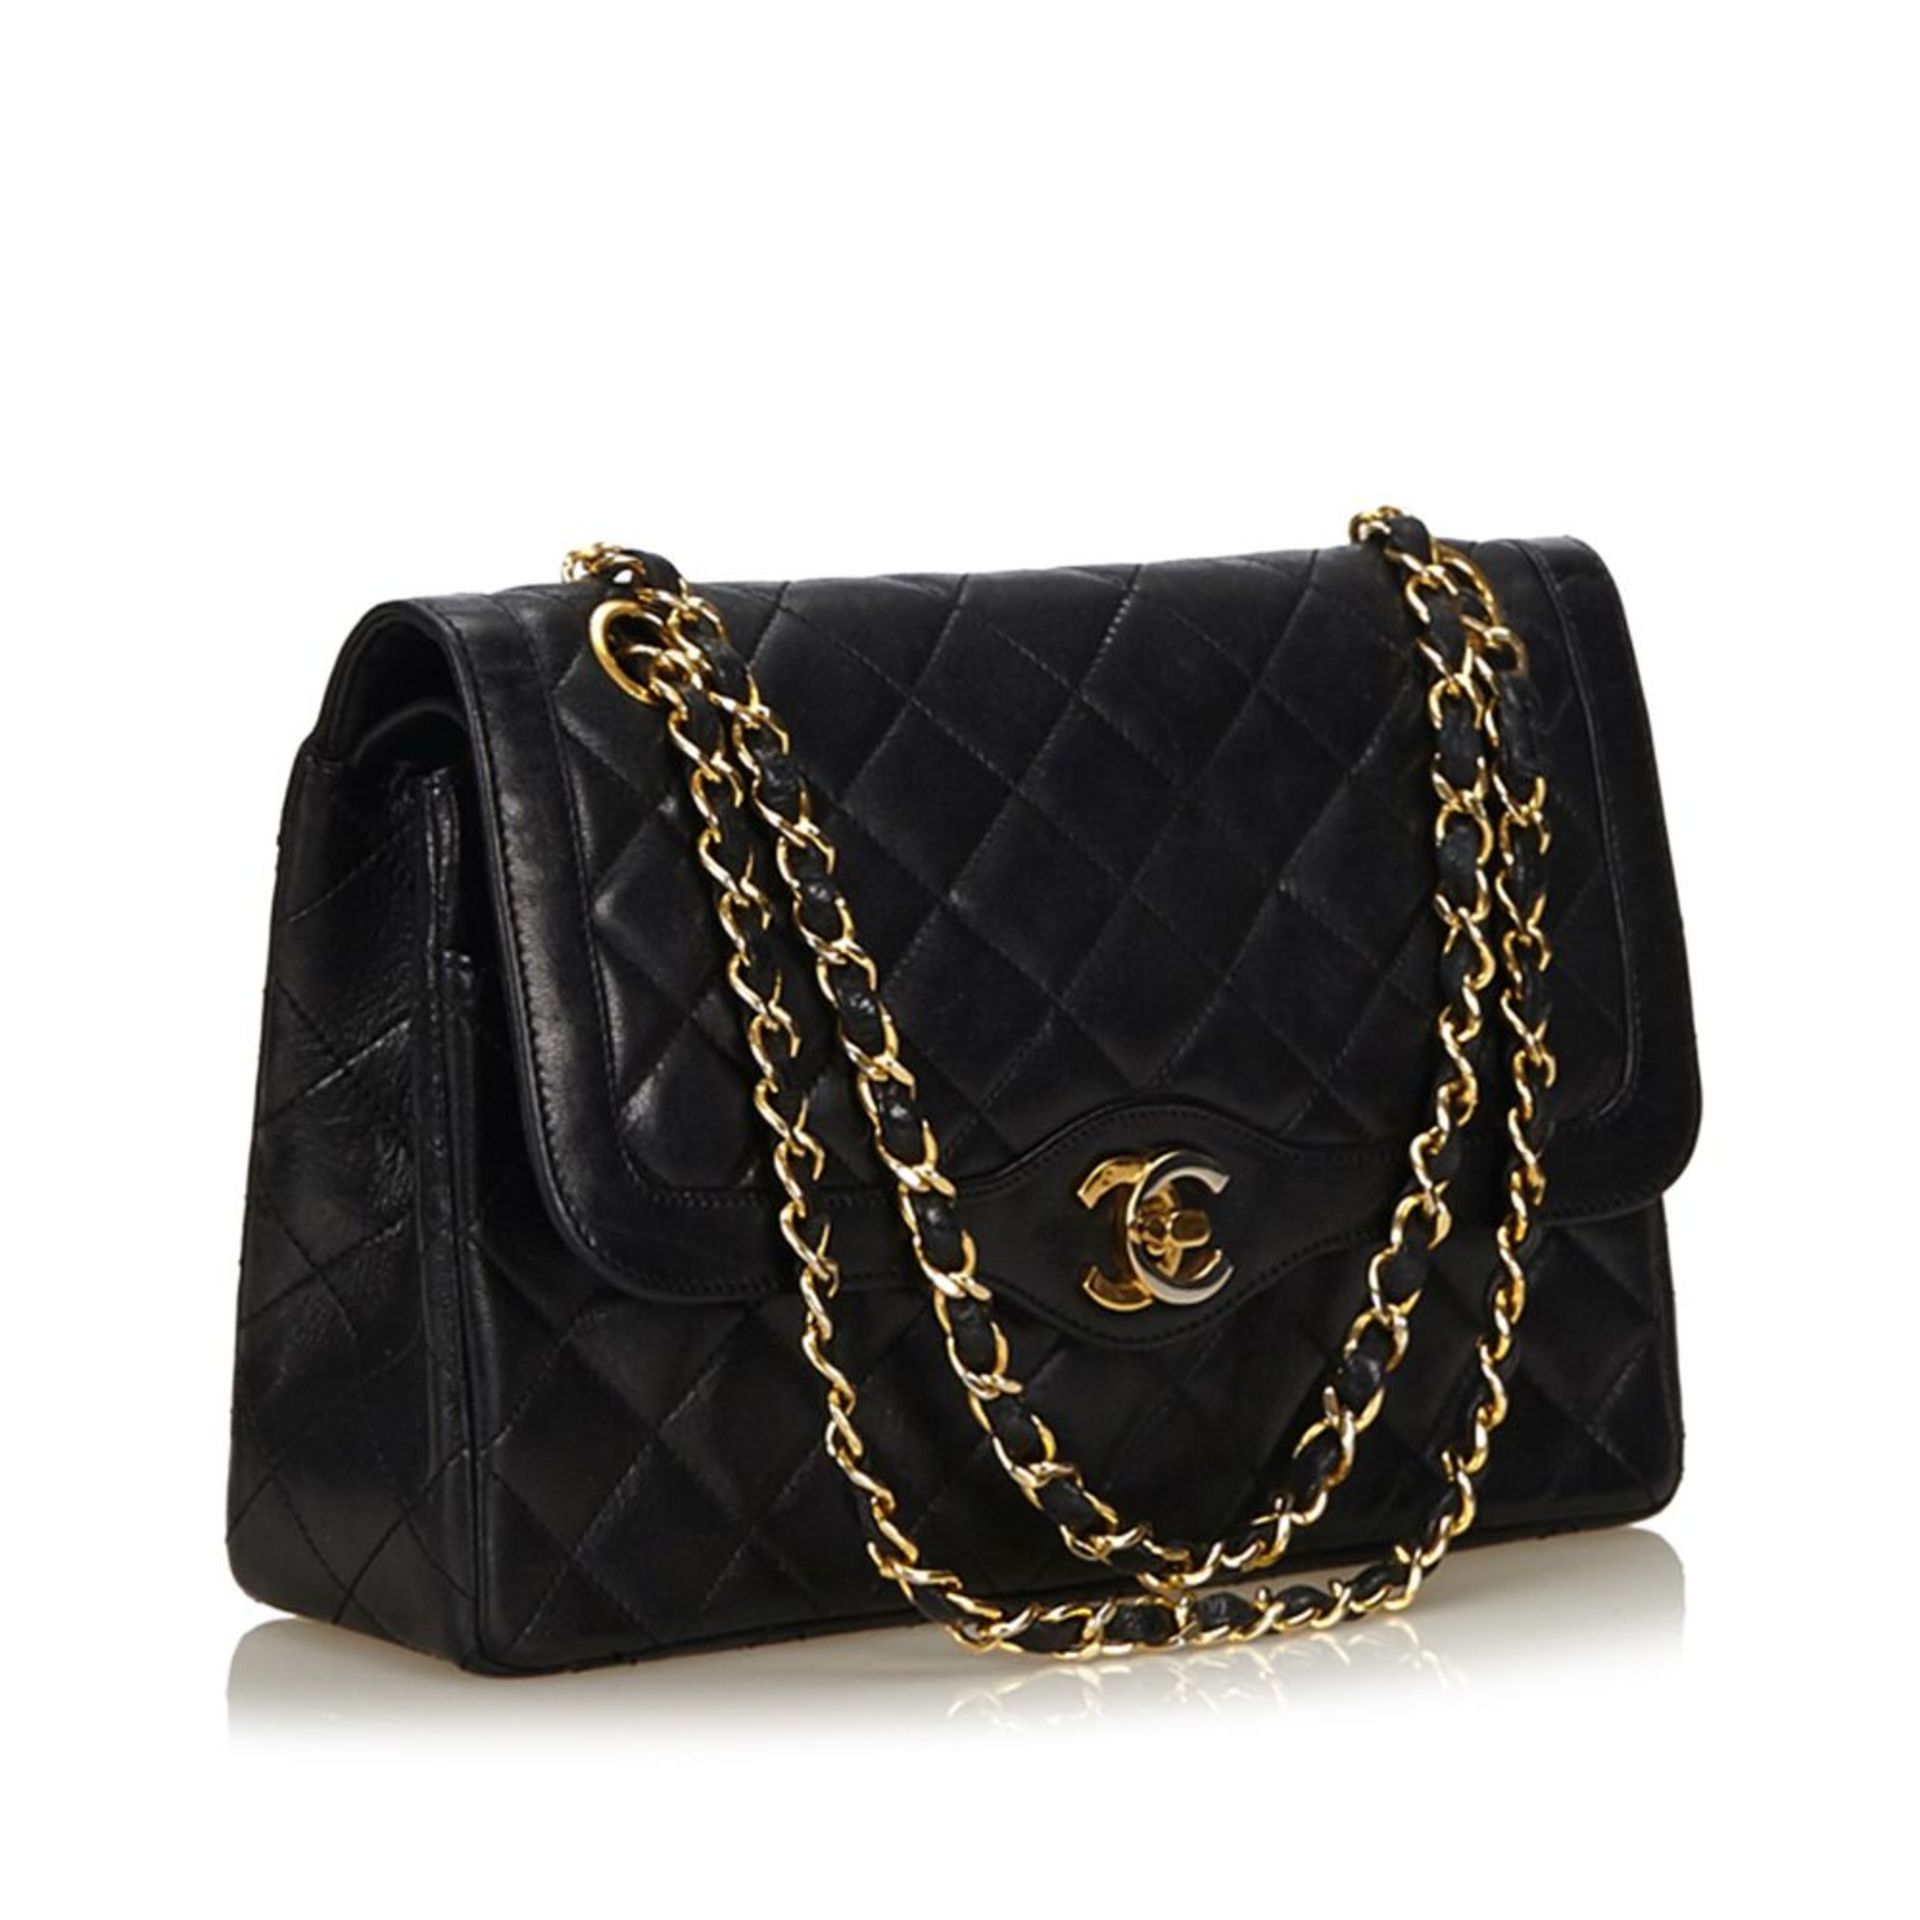 A Chanel matelassé leather flap handbag,featuring a leather body, gold-tone chains, a front flap - Image 2 of 6